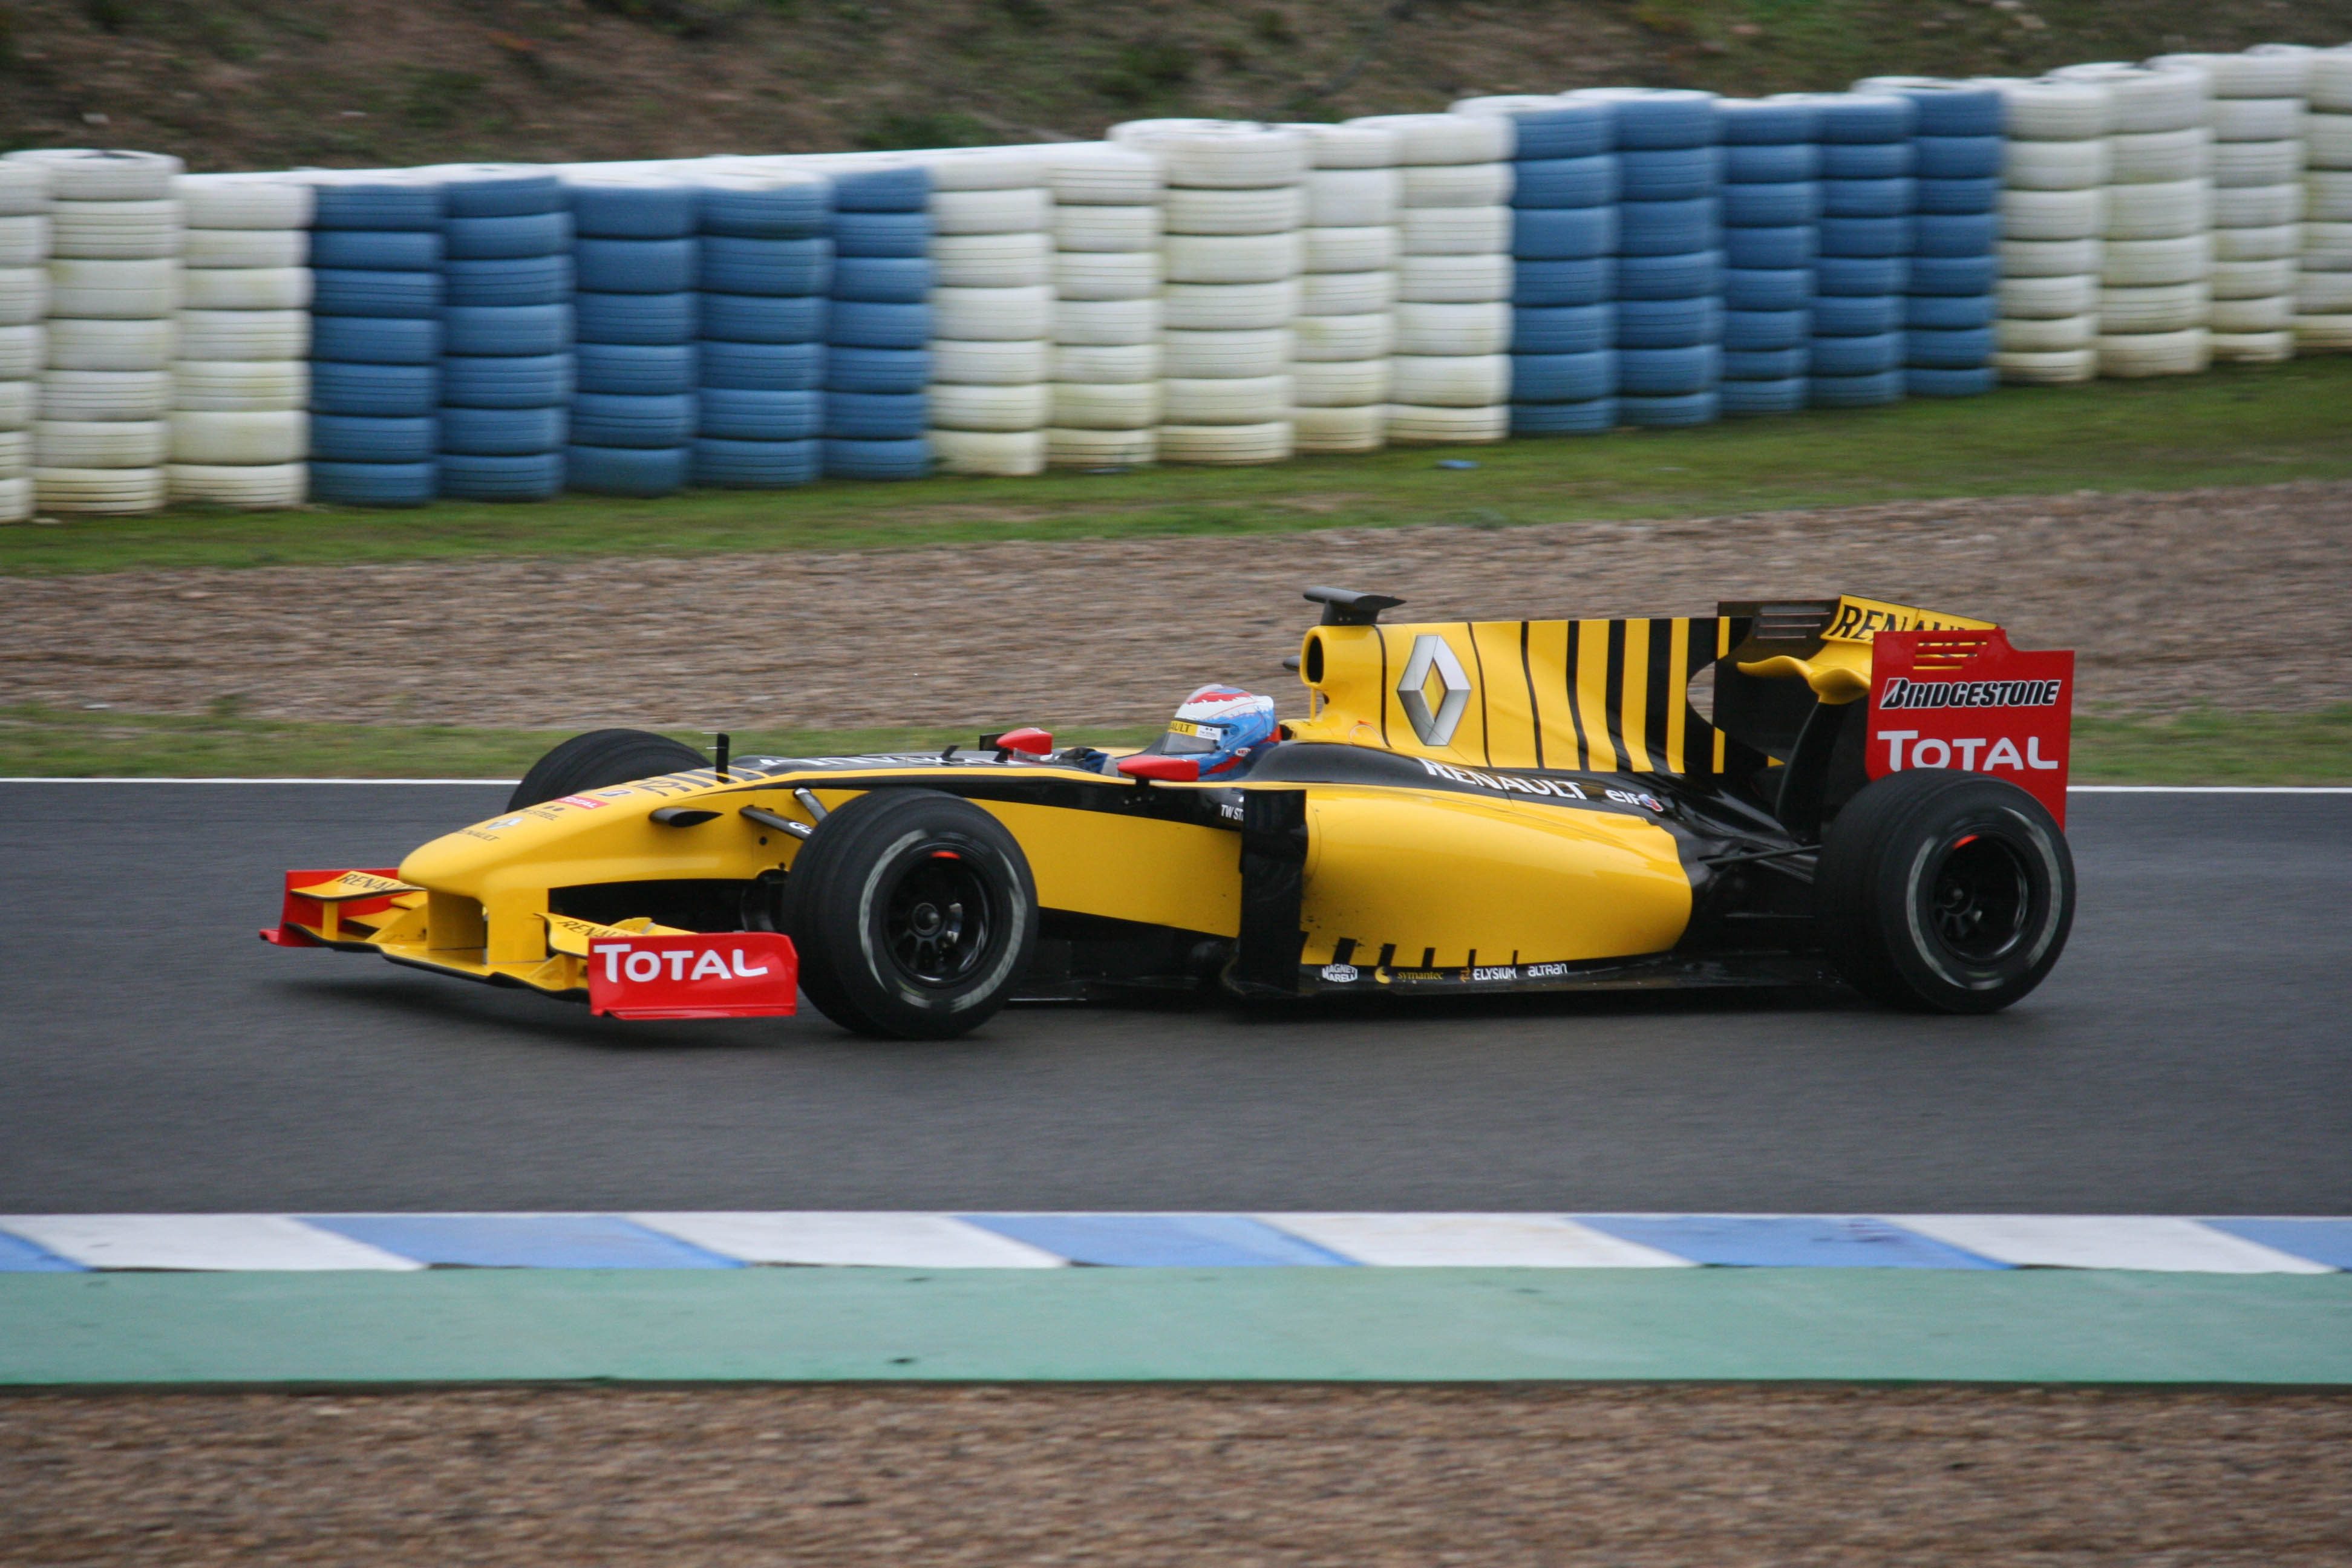 Renault_R30_driven_by_Vitaly_Petrov_tests_at_Jerez_2010.jpg